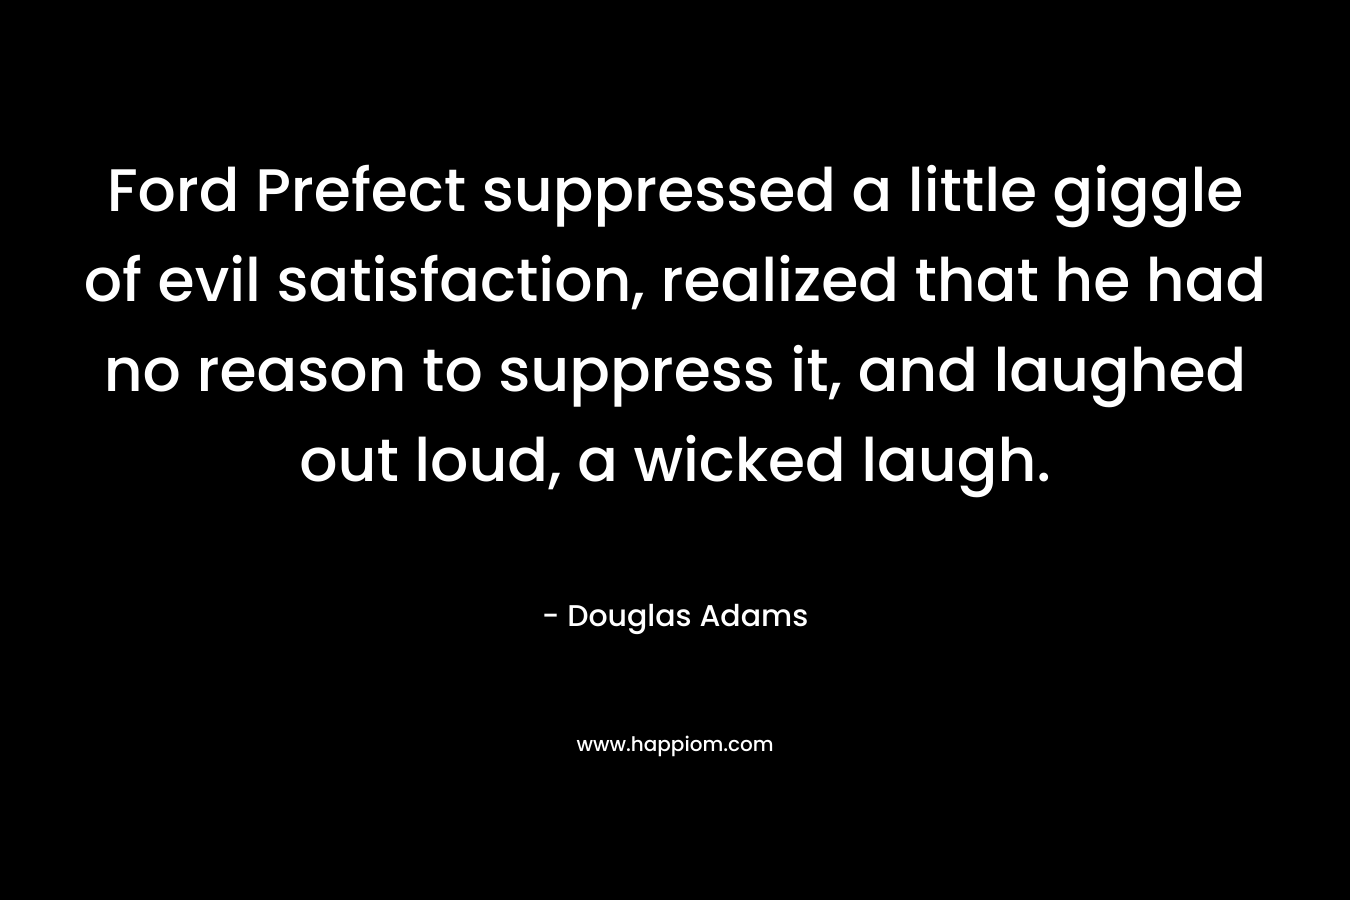 Ford Prefect suppressed a little giggle of evil satisfaction, realized that he had no reason to suppress it, and laughed out loud, a wicked laugh. – Douglas Adams